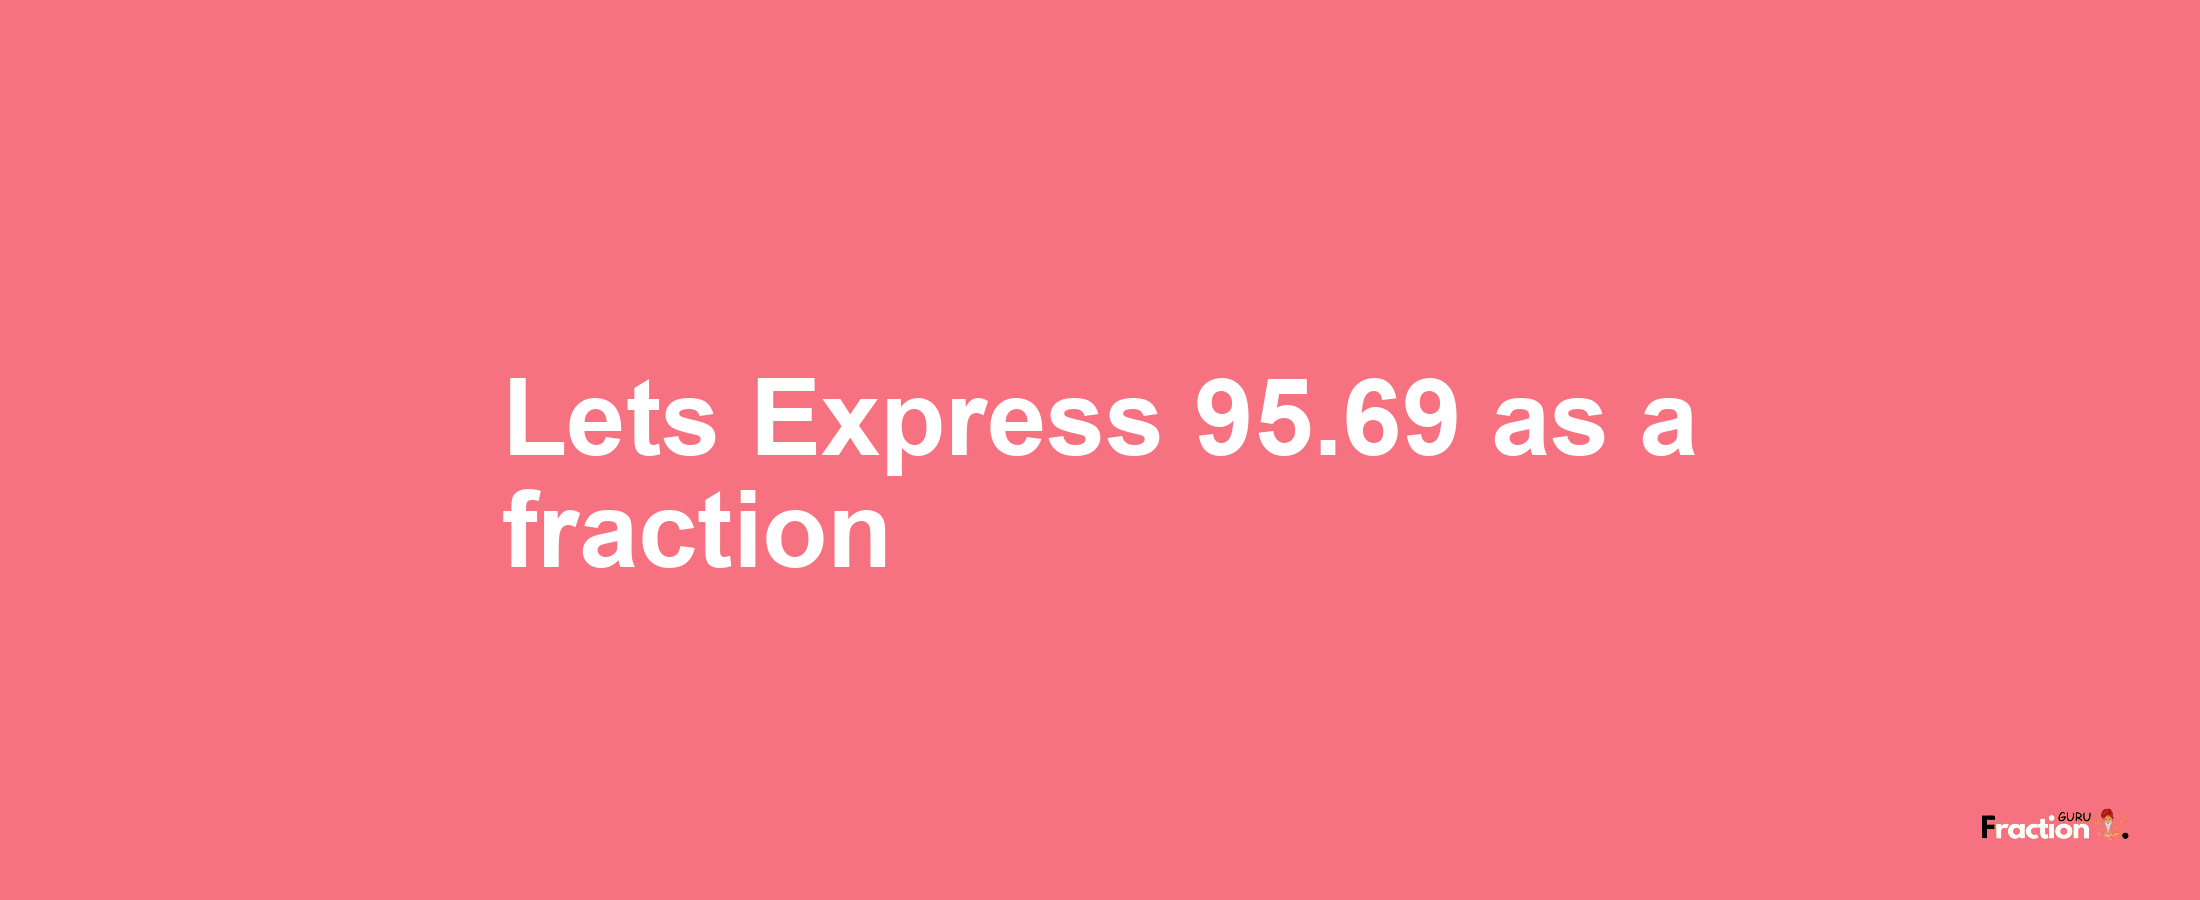 Lets Express 95.69 as afraction